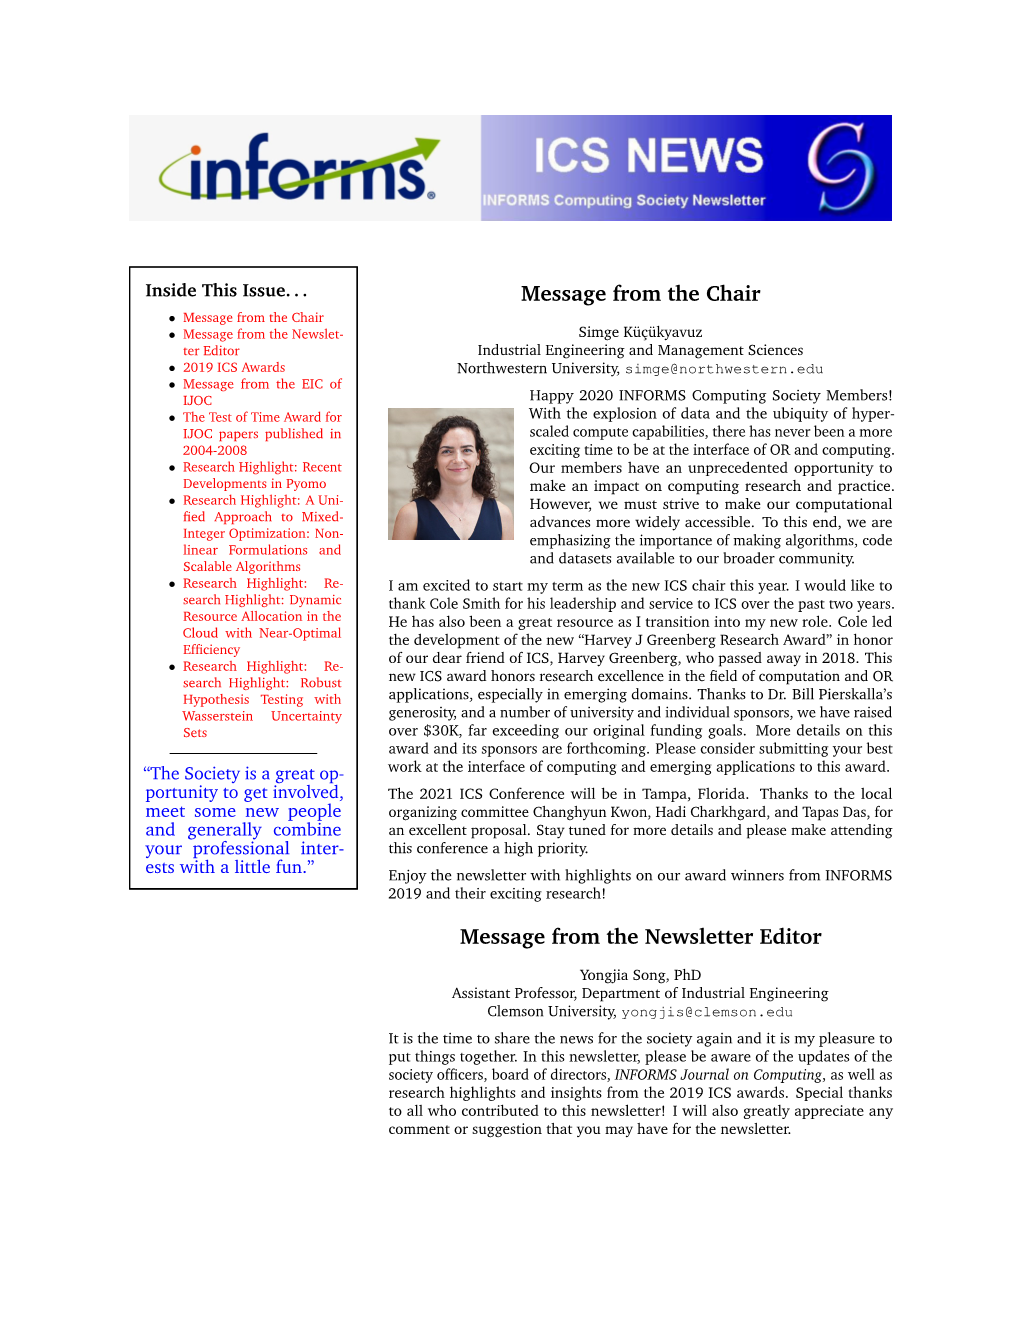 ICS Newsletter: Is Given at Most Every Two Years